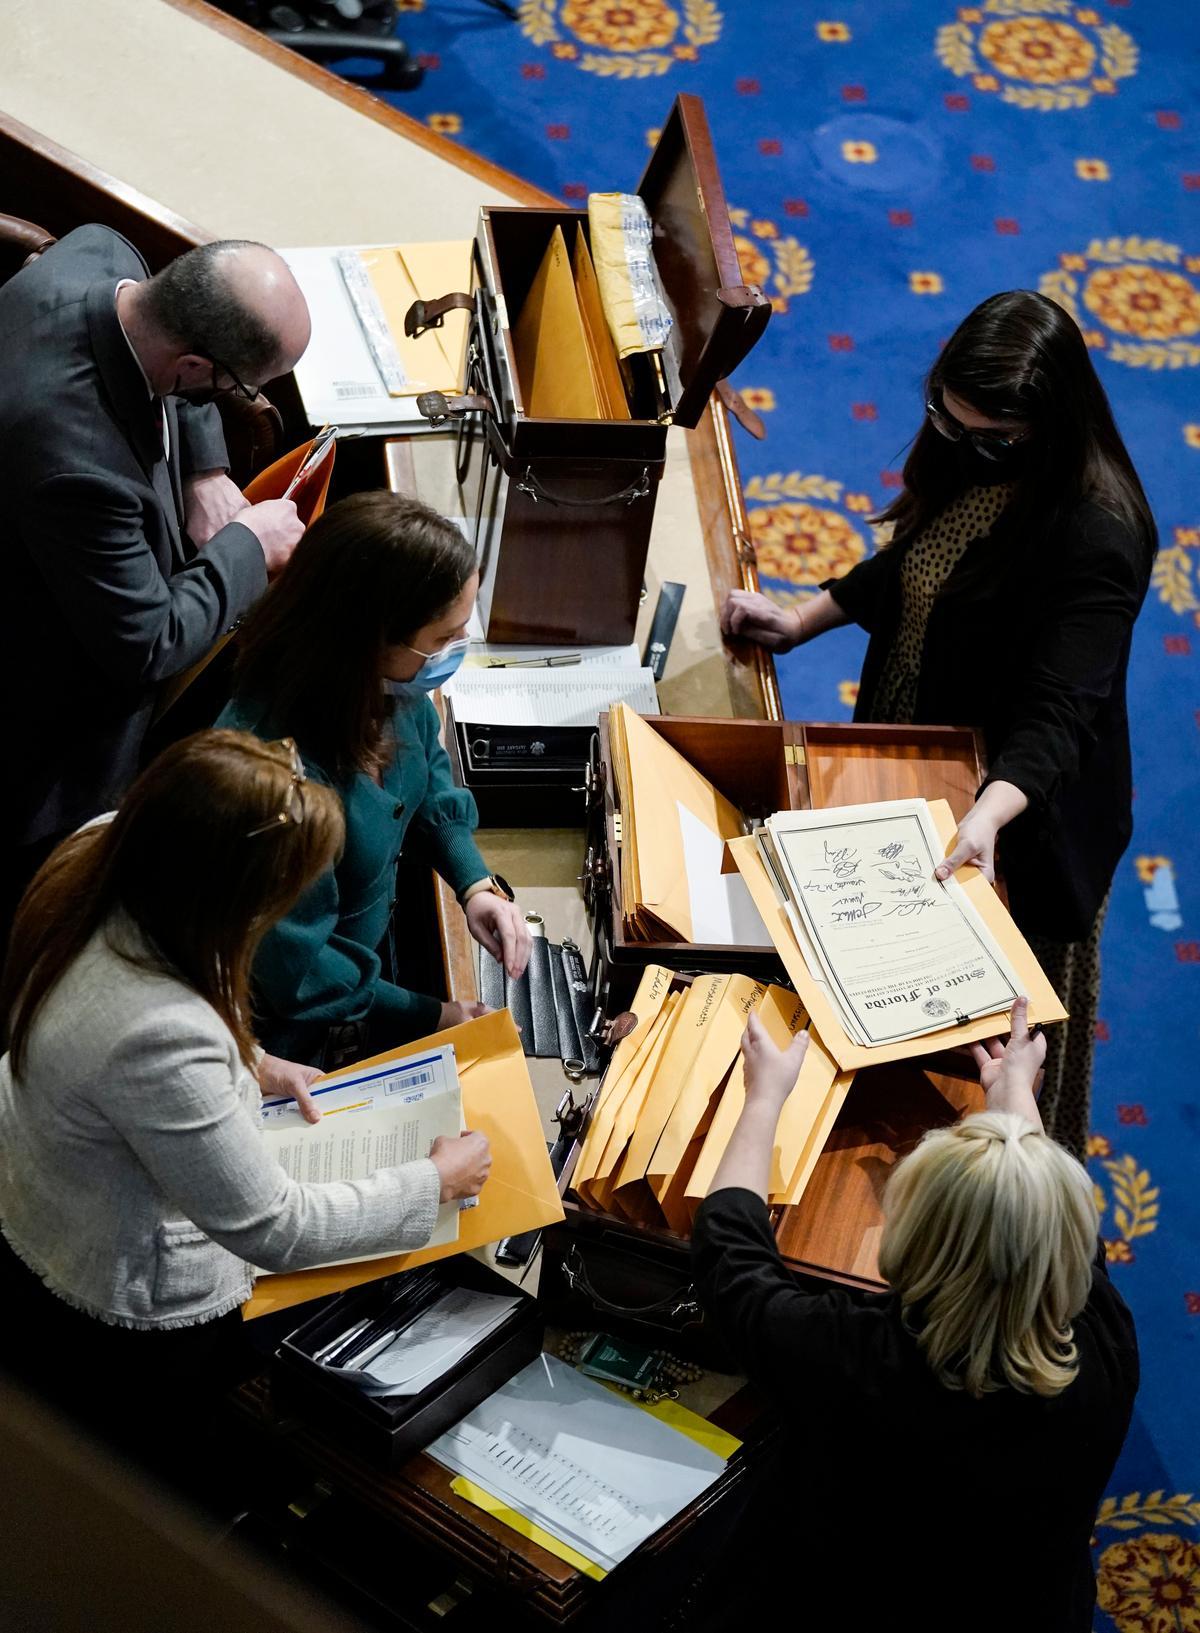 Congressional aides examine electoral college votes in the House Chamber during a reconvening of a joint session of Congress in Washington on Jan. 6, 2021. (Drew Angerer/Getty Images)